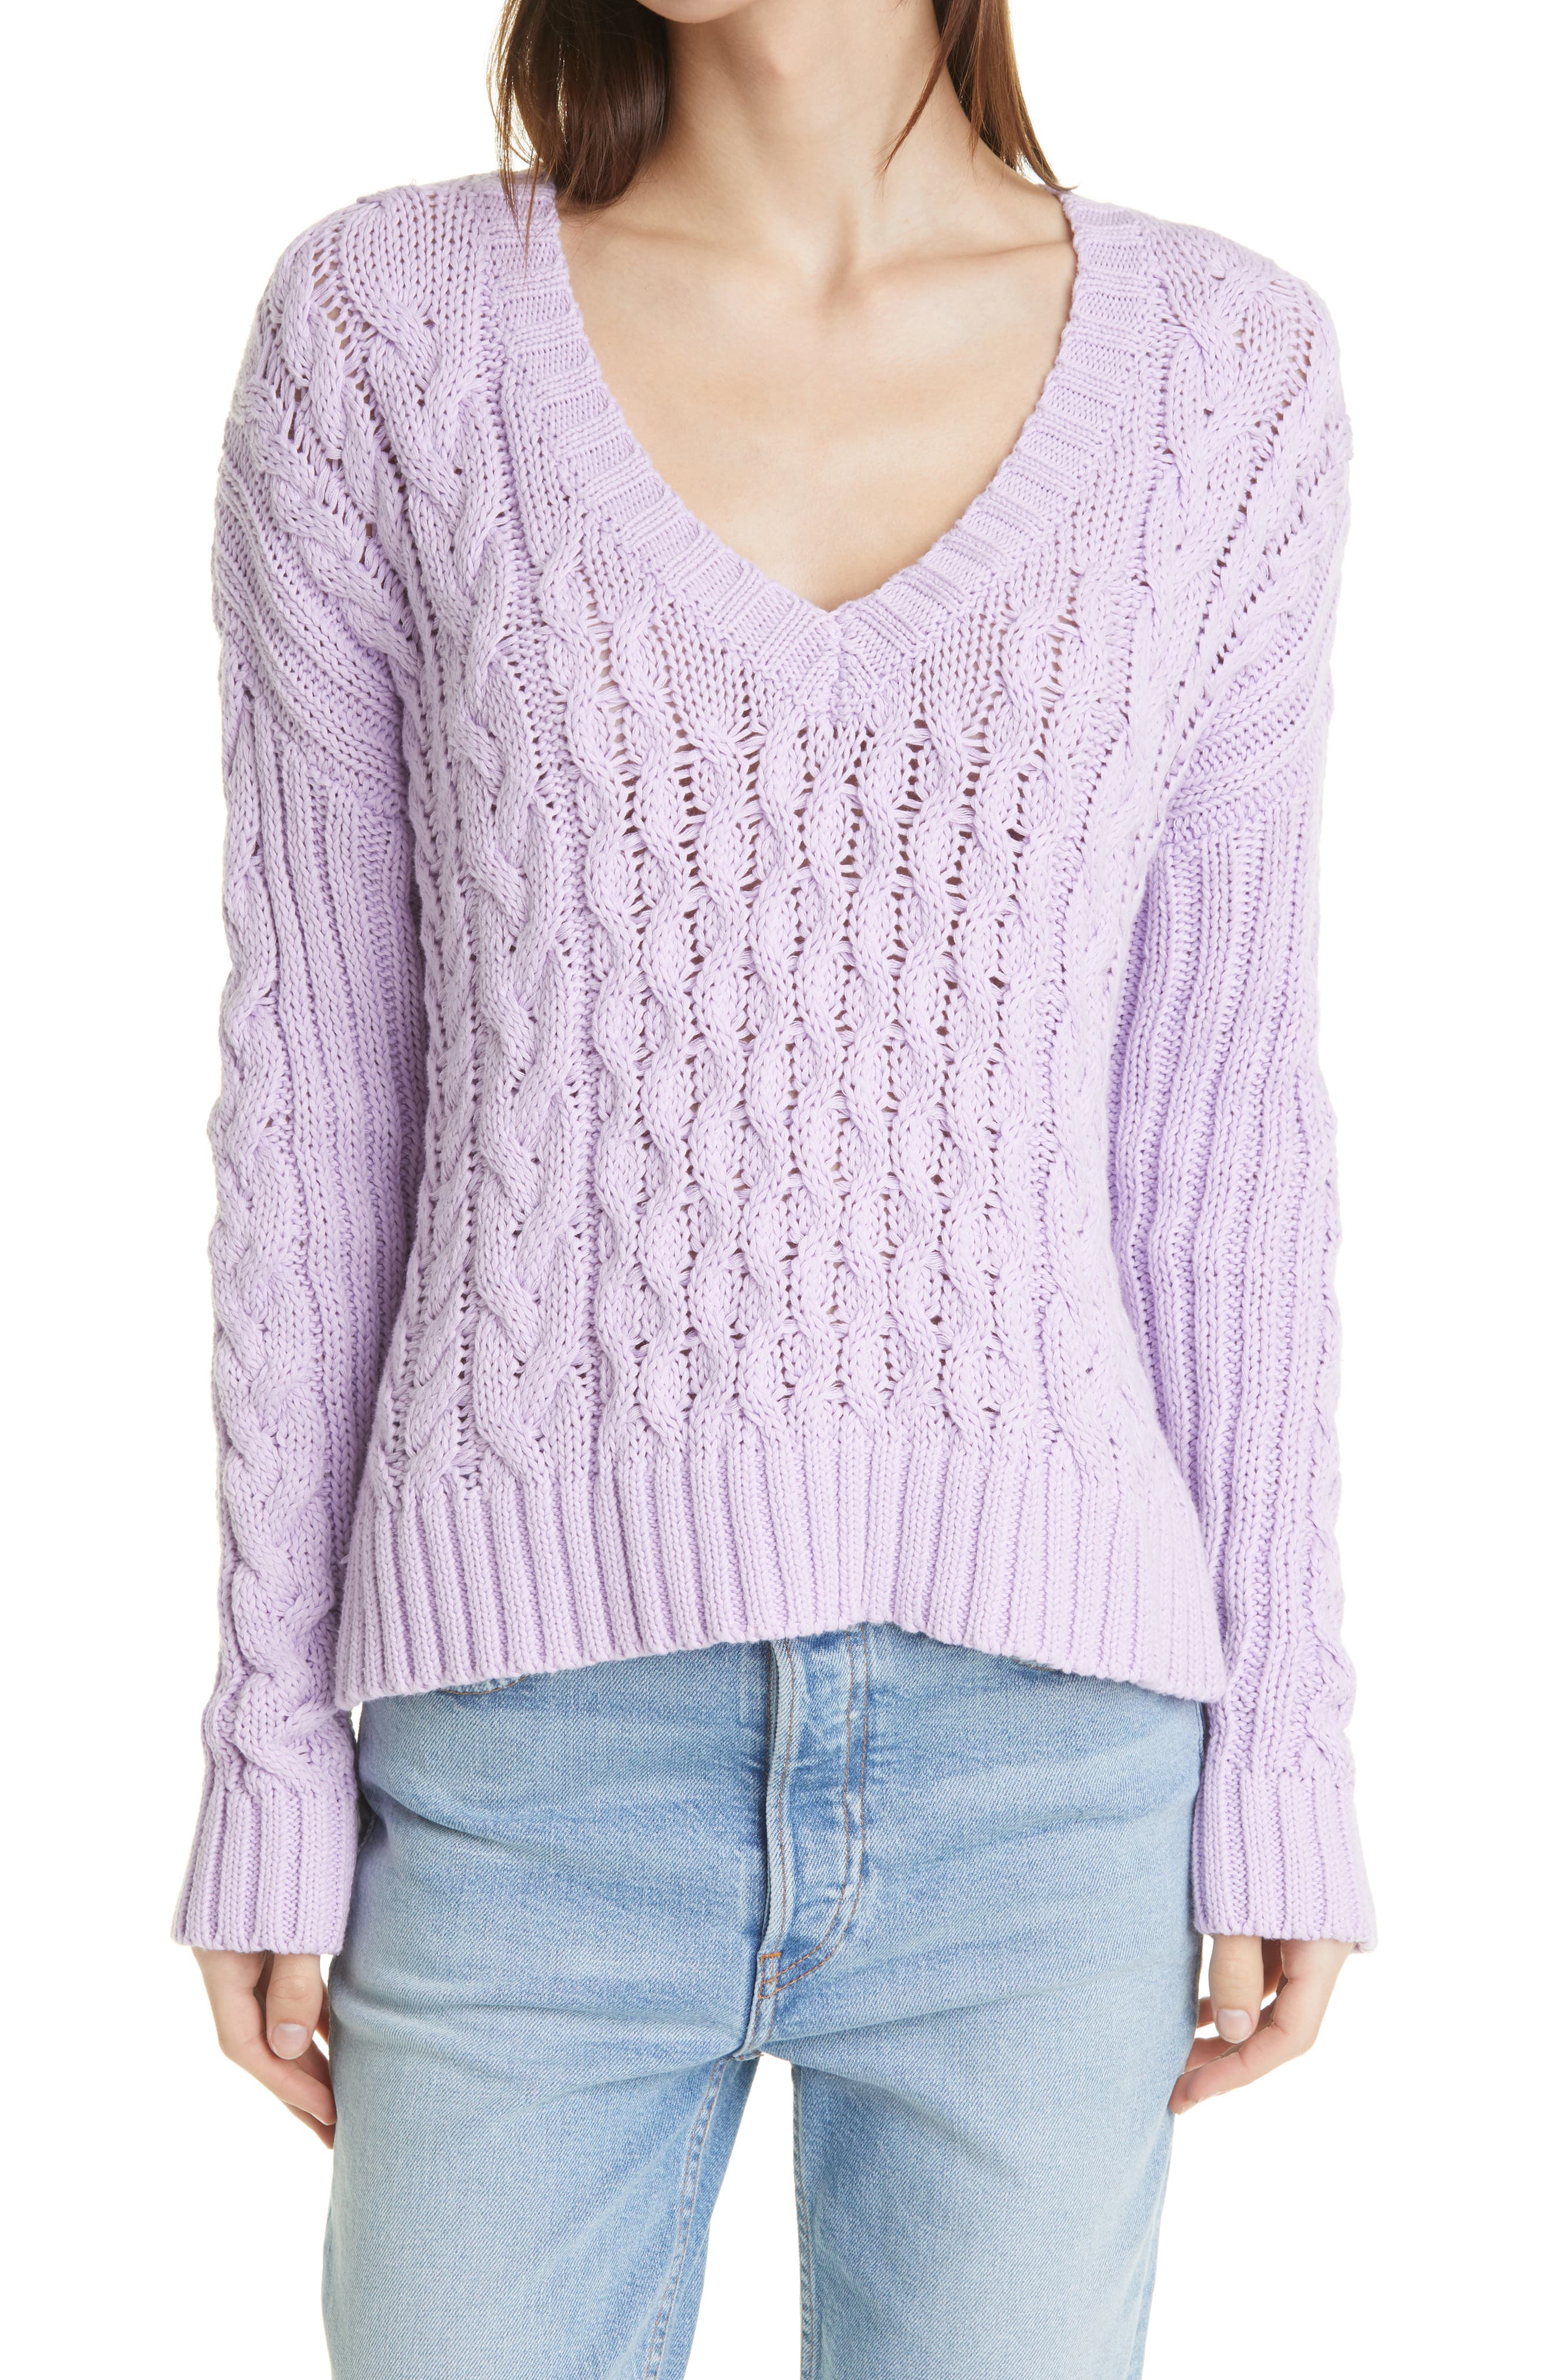 LINE Leah V-Neck Cable Knit Sweater in 5010- Lavender at Nordstrom